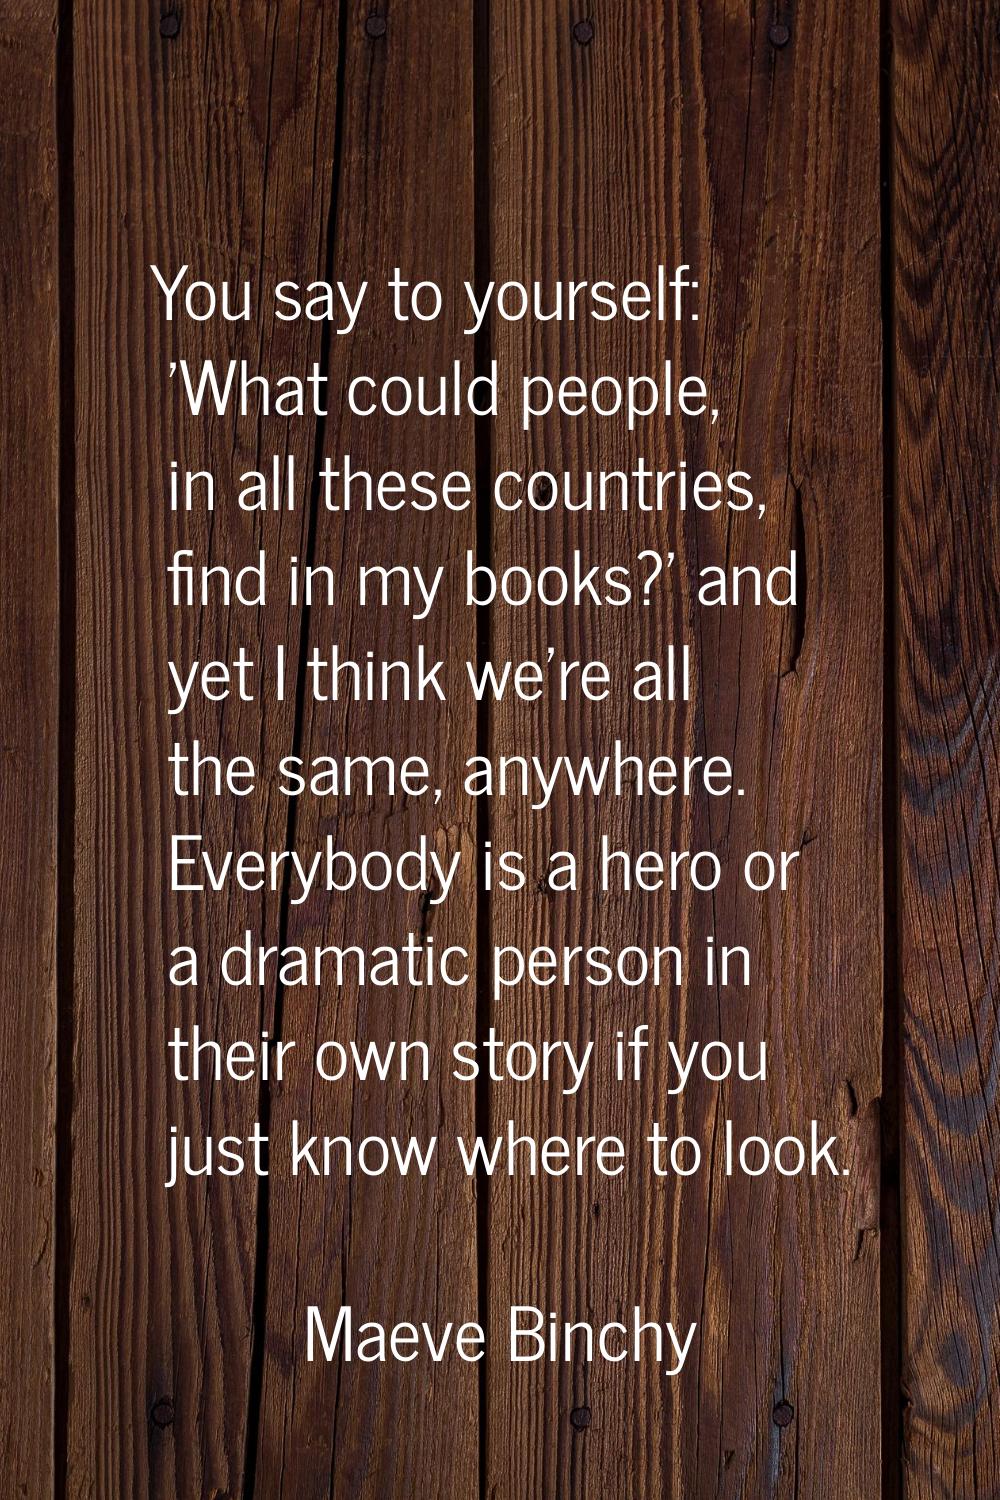 You say to yourself: 'What could people, in all these countries, find in my books?' and yet I think